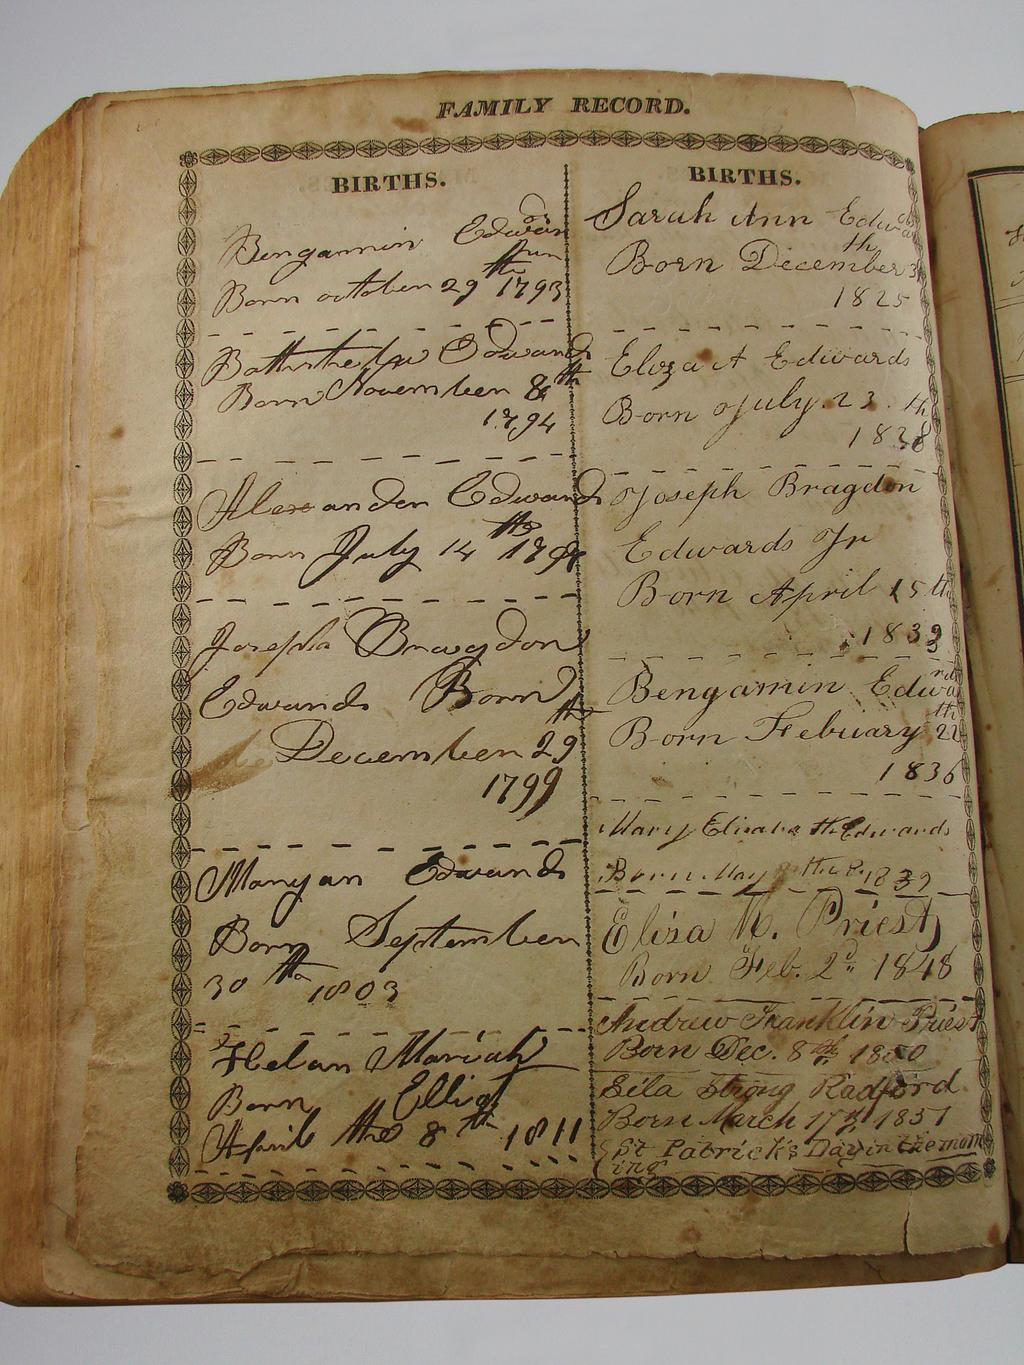 The birth records of Joseph B. Edwards (1799-1852) and his siblings in the 1812 Edwards family Bible. Joseph B. married Sarah Mace at the West Church in Boston on October 30, 1823.